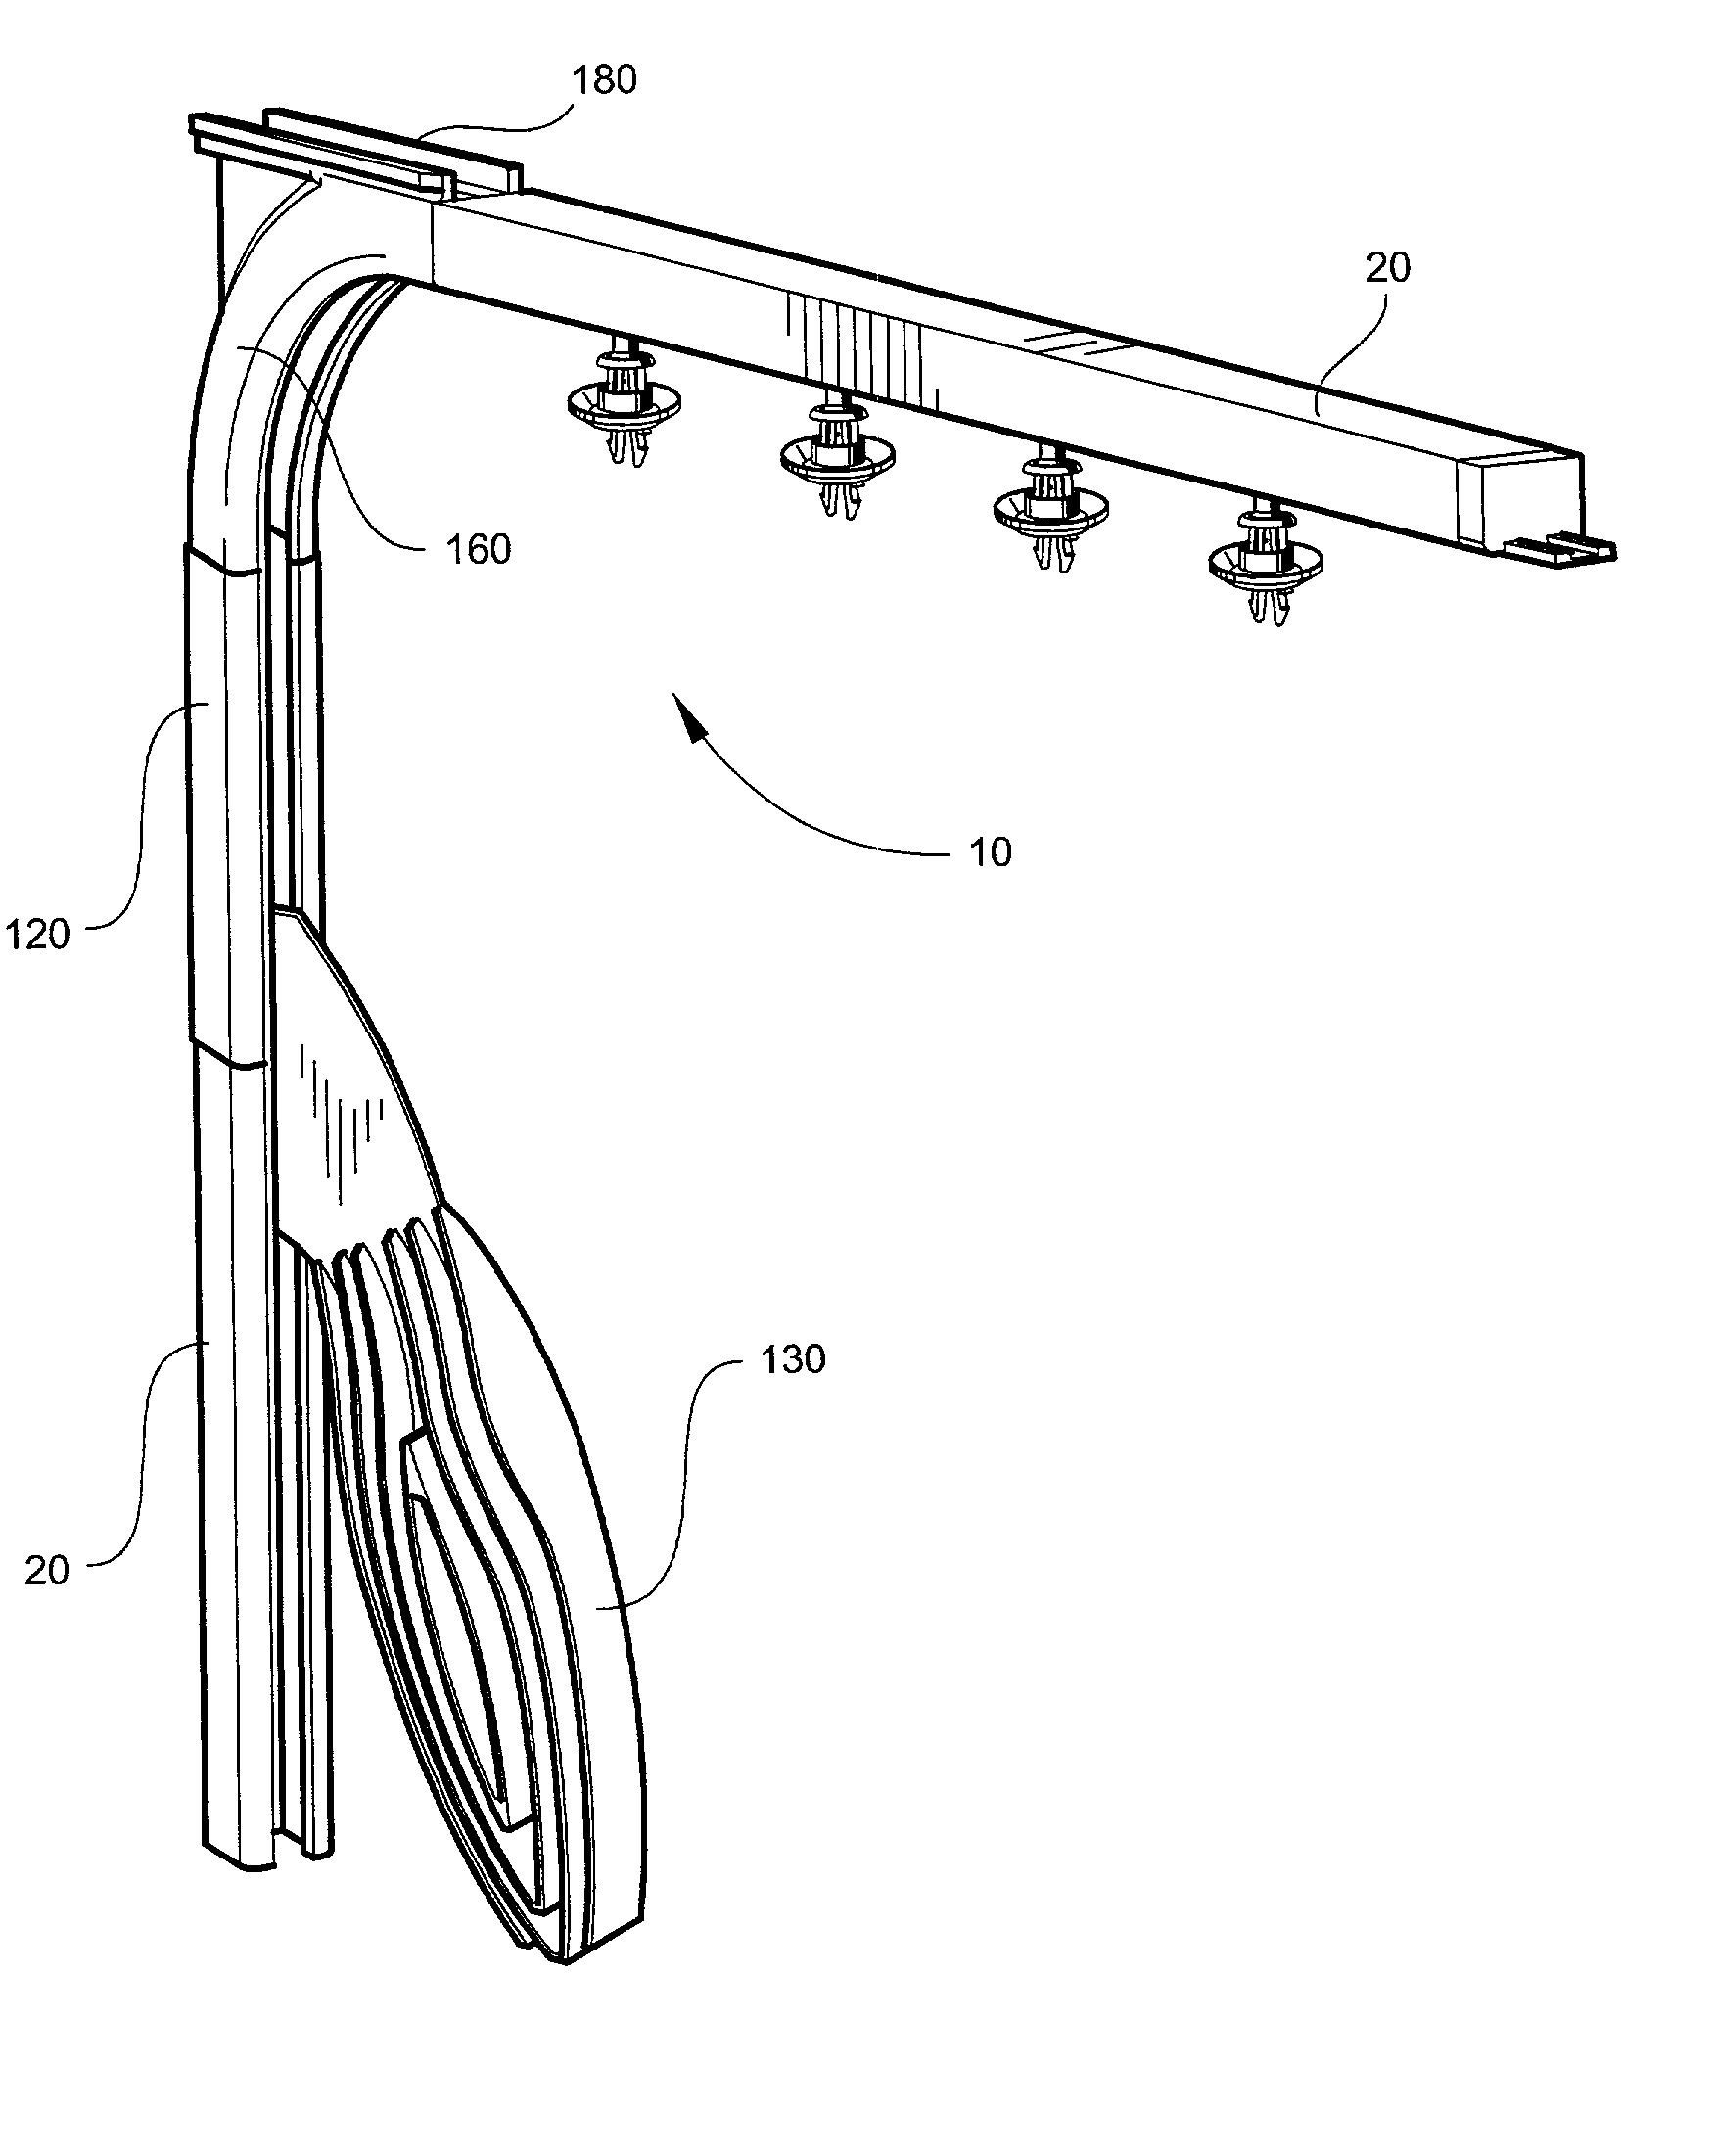 Channel system for light strings